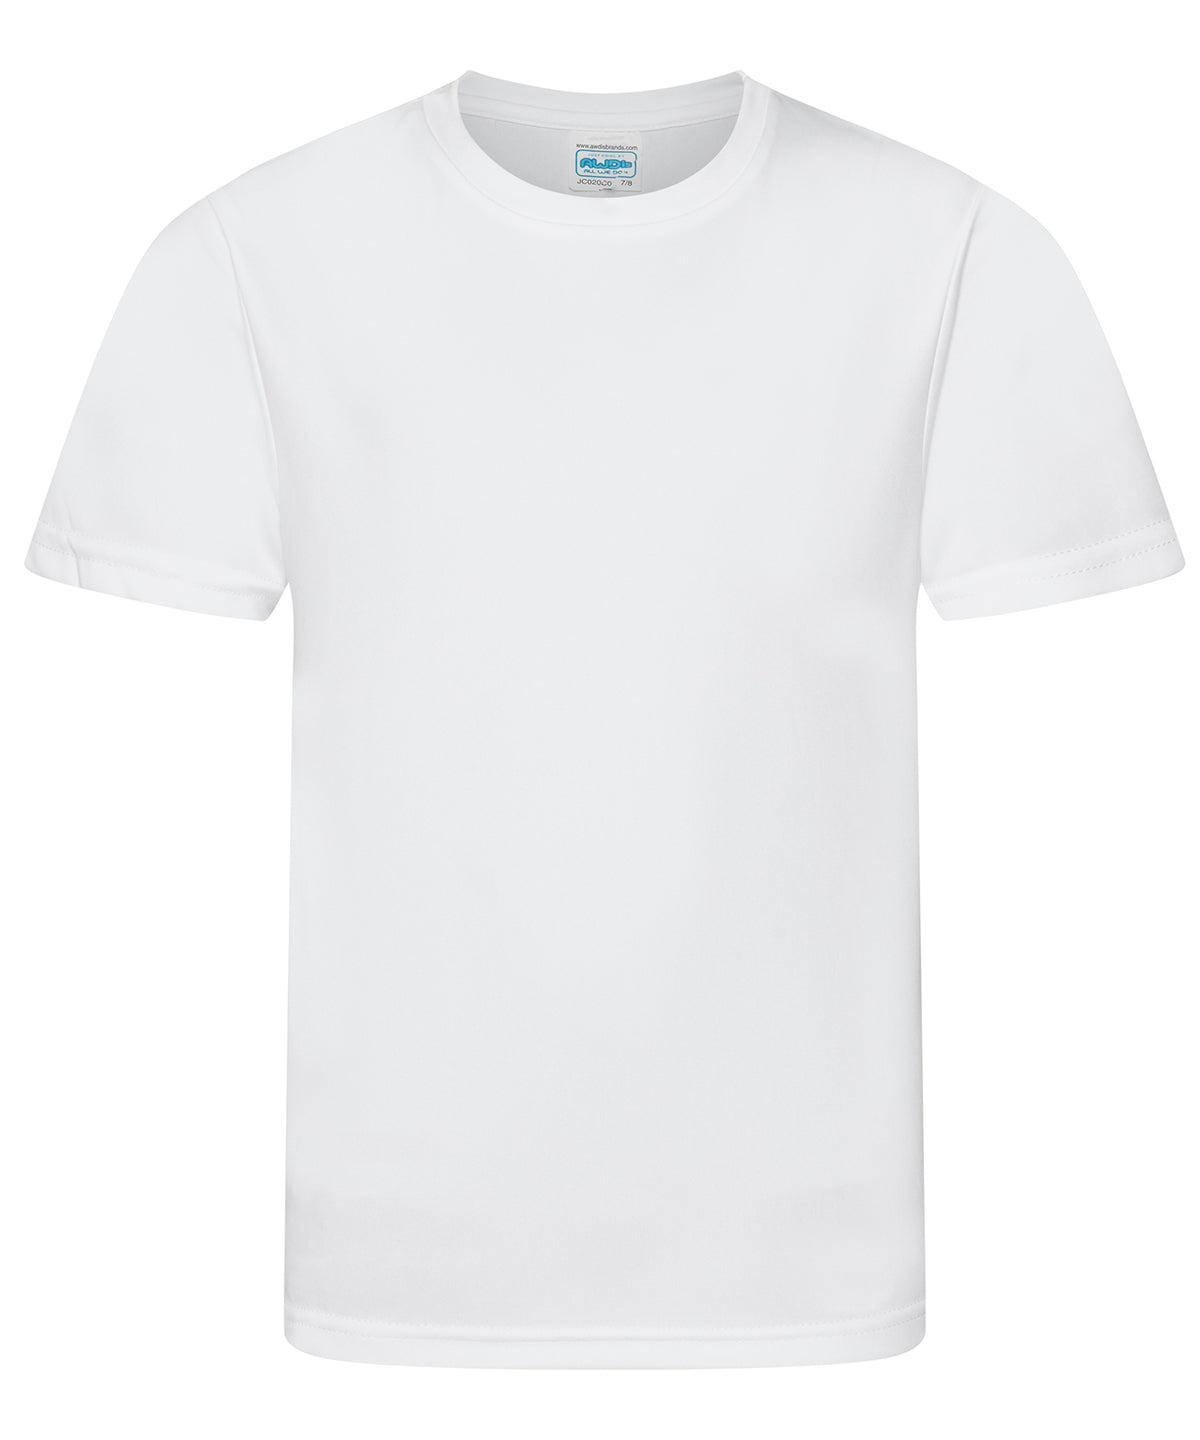 Personalised T-Shirts - White AWDis Just Cool Kids cool smooth T